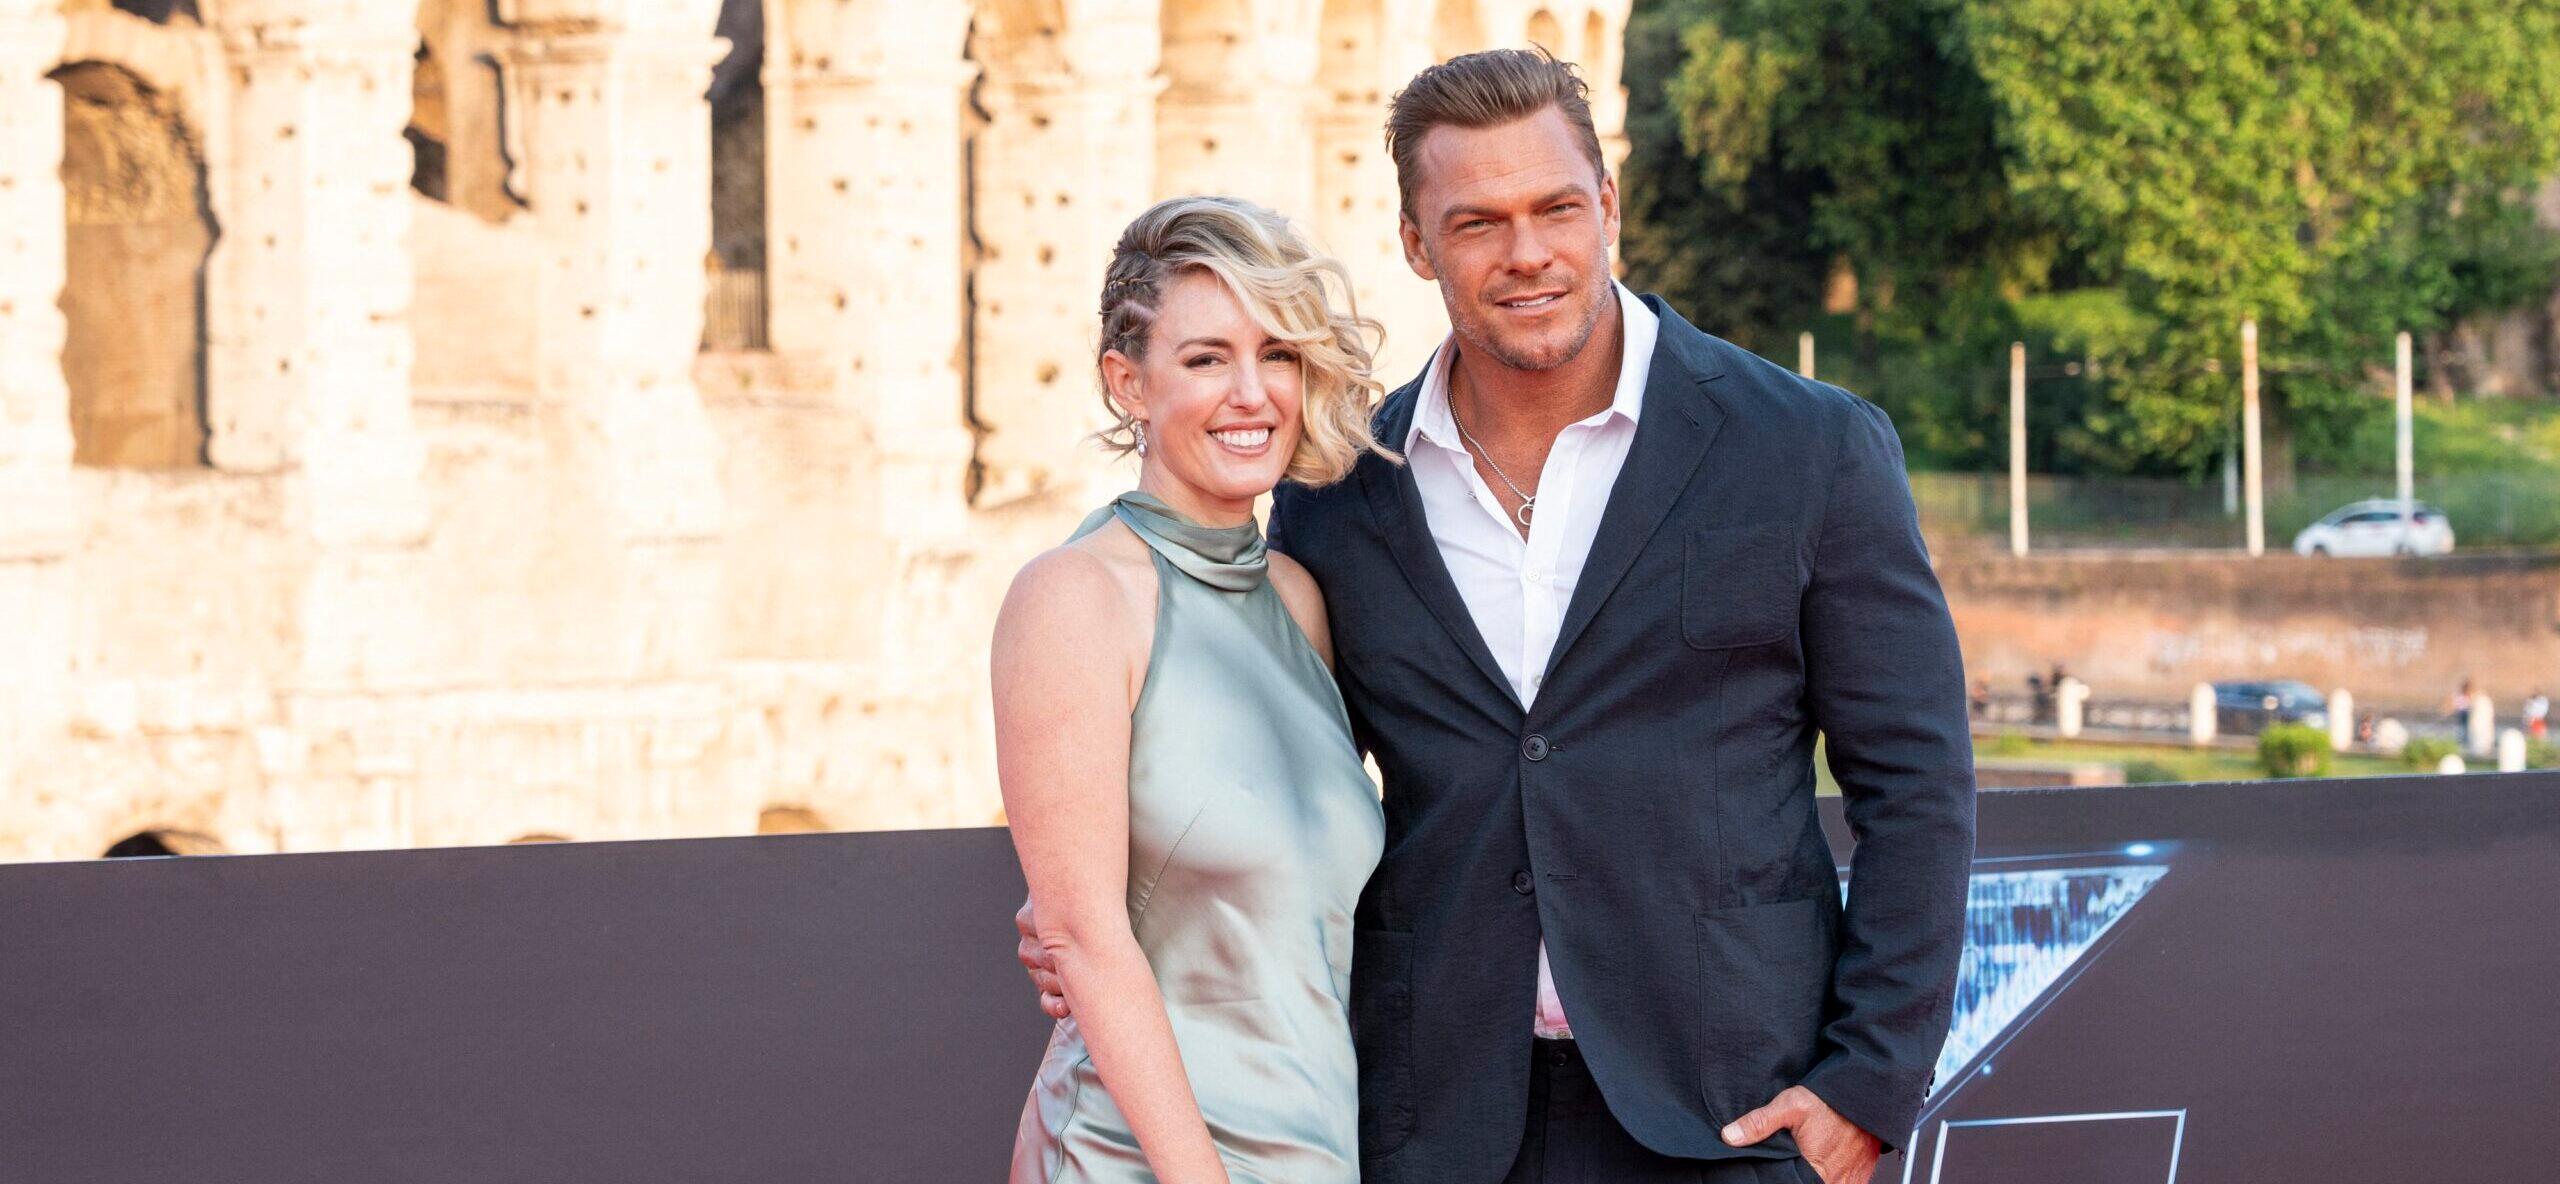 Alan Ritchson - "Fast X" World Premiere in Rome